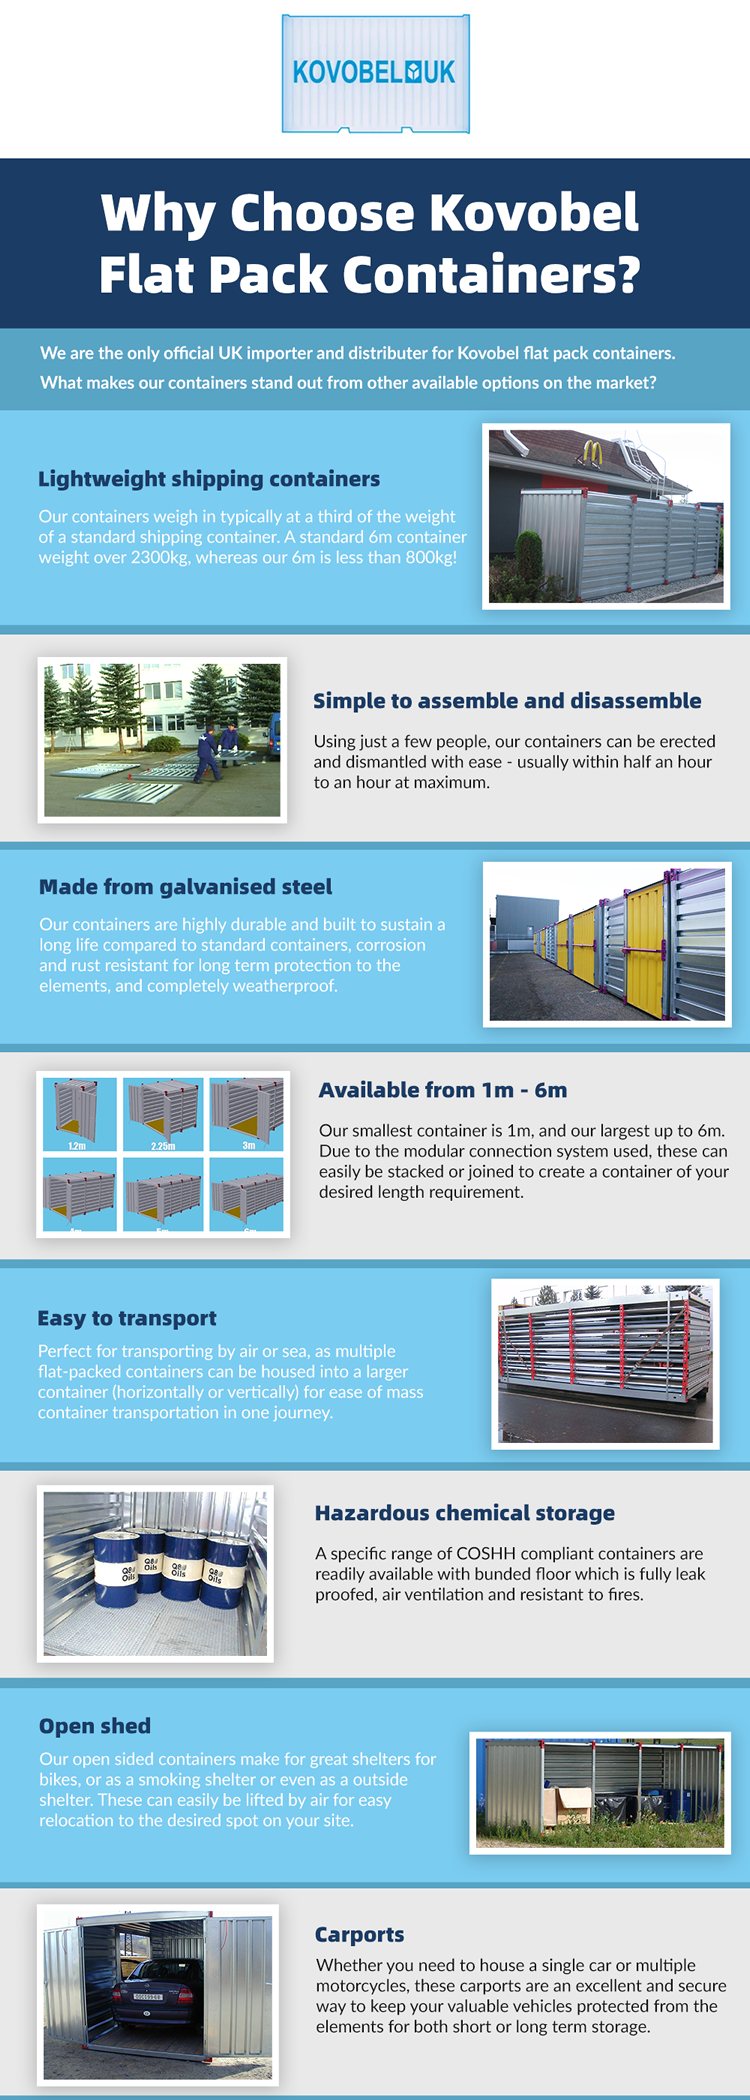 Kovobel flat pack containers - Infographic